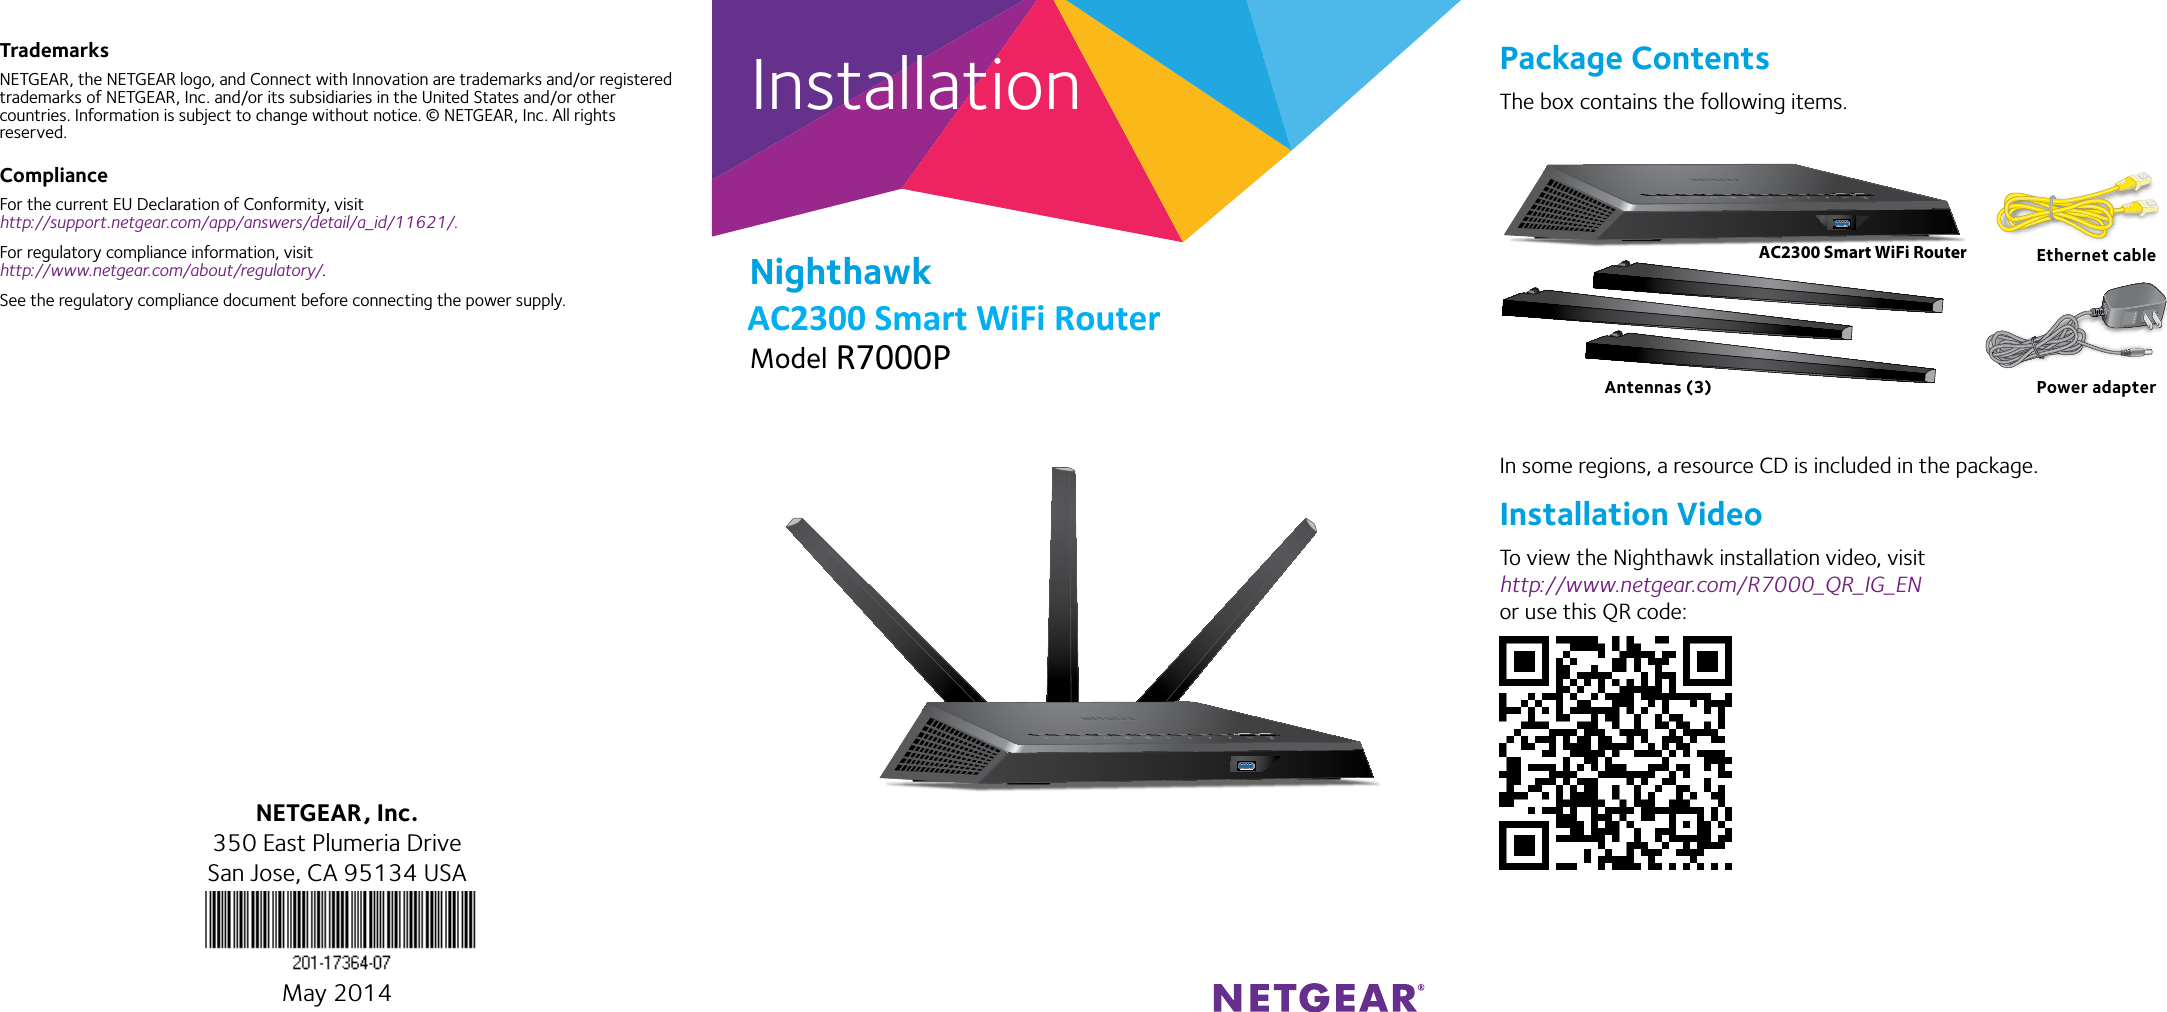 InstallationNighthawk AC1900 Smart WiFi RouterModel R7000TrademarksNETGEAR, the NETGEAR logo, and Connect with Innovation are trademarks and/or registered trademarks of NETGEAR, Inc. and/or its subsidiaries in the United States and/or other countries. Information is subject to change without notice. © NETGEAR, Inc. All rights reserved.ComplianceFor the current EU Declaration of Conformity, visit  http://support.netgear.com/app/answers/detail/a_id/11621/. For regulatory compliance information, visit http://www.netgear.com/about/regulatory/.See the regulatory compliance document before connecting the power supply.Package ContentsThe box contains the following items.In some regions, a resource CD is included in the package.Installation VideoTo view the Nighthawk installation video, visit http://www.netgear.com/R7000_QR_IG_EN or use this QR code:NETGEAR, Inc.350 East Plumeria DriveSan Jose, CA 95134 USAMay 2014AC1900 Smart WiFi Router Ethernet cablePower adapterAntennas (3)AC2300 Smart WiFi Router   R7000P AC2300 Smart WiFi Router 